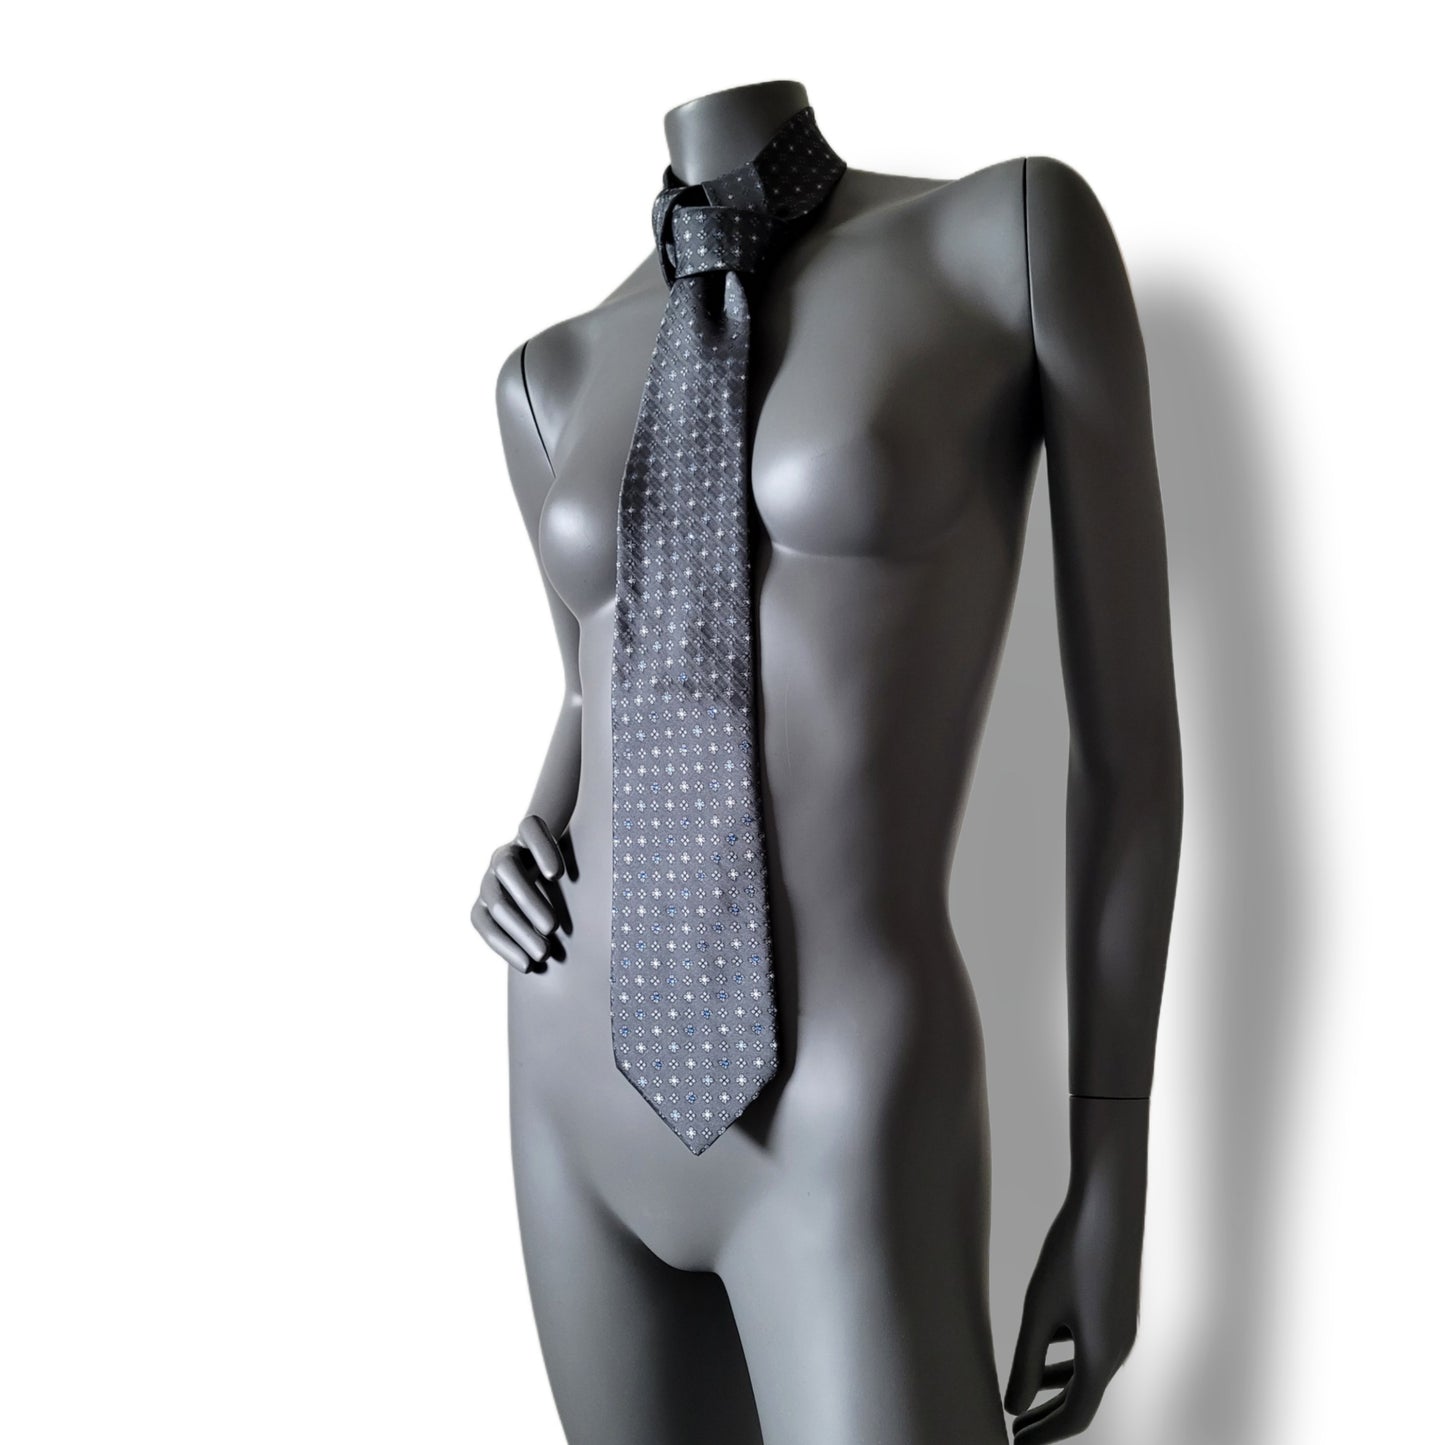 Another Dance collection: Skyfall tie, vintage gray silk necktie with pale blue glass crystals